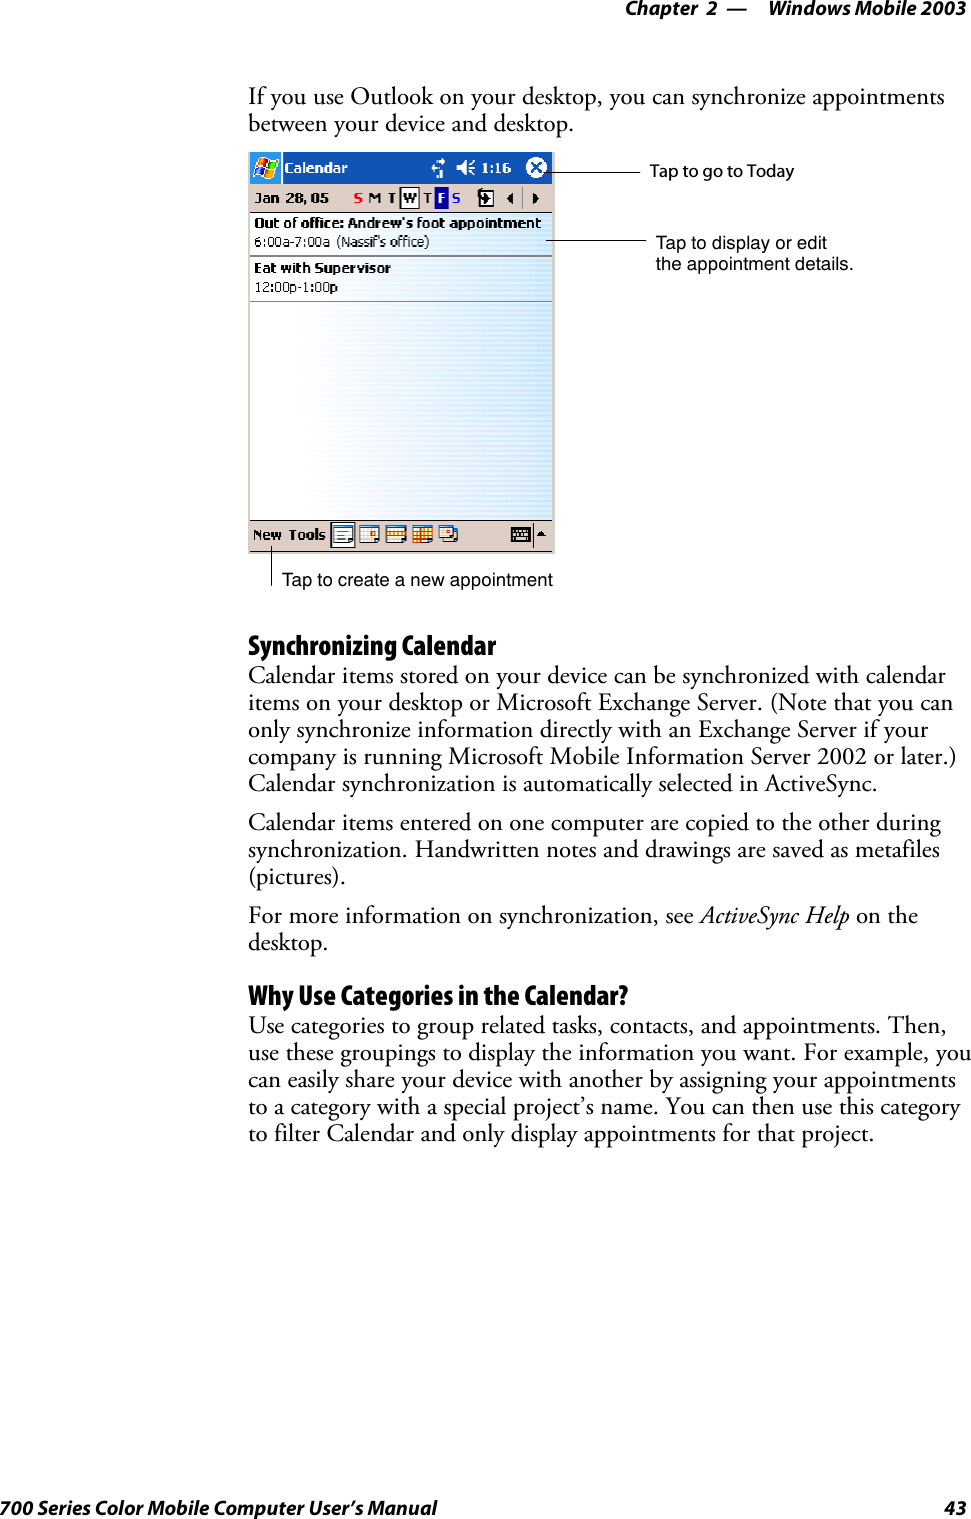 Windows Mobile 2003—Chapter 243700 Series Color Mobile Computer User’s ManualIf you use Outlook on your desktop, you can synchronize appointmentsbetween your device and desktop.Tap to create a new appointmentTaptogotoTodayTap to display or editthe appointment details.Synchronizing CalendarCalendar items stored on your device can be synchronized with calendaritems on your desktop or Microsoft Exchange Server. (Note that you canonly synchronize information directly with an Exchange Server if yourcompany is running Microsoft Mobile Information Server 2002 or later.)Calendar synchronization is automatically selected in ActiveSync.Calendar items entered on one computer are copied to the other duringsynchronization. Handwritten notes and drawings are saved as metafiles(pictures).For more information on synchronization, see ActiveSync Help on thedesktop.Why Use Categories in the Calendar?Use categories to group related tasks, contacts, and appointments. Then,use these groupings to display the information you want. For example, youcan easily share your device with another by assigning your appointmentsto a category with a special project’s name. You can then use this categoryto filter Calendar and only display appointments for that project.